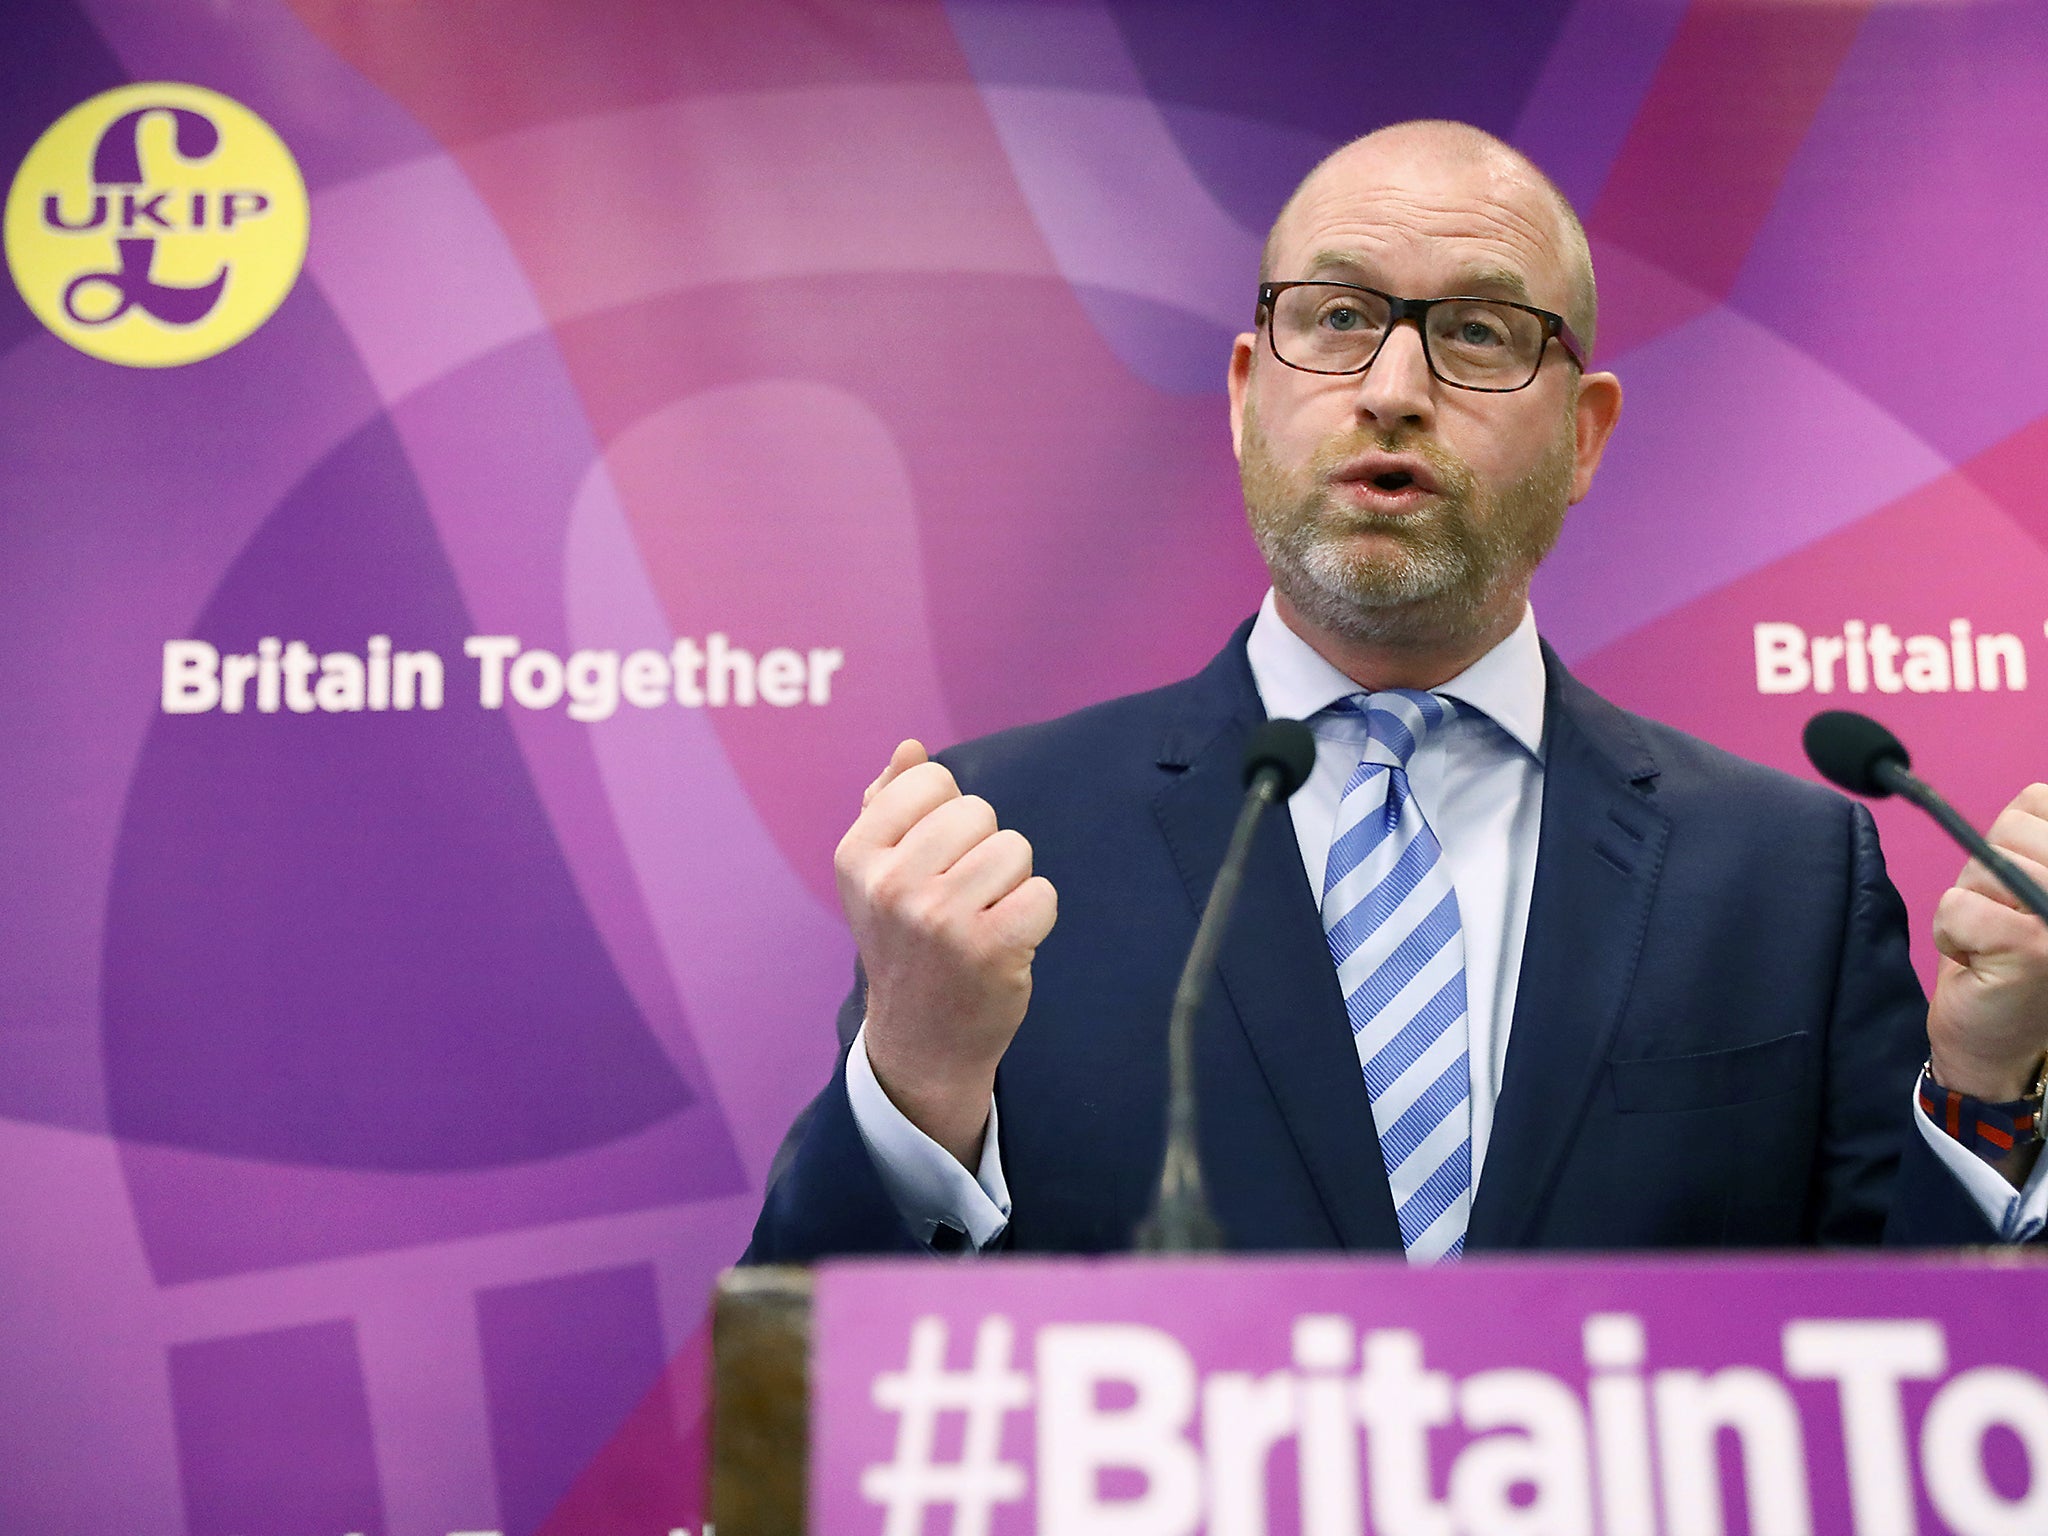 Paul Nuttall's party will not stand candidates in seats where a pro-Brexit MP is sitting or where a pro-Brexit Tory candidate has a realistic chance of winning